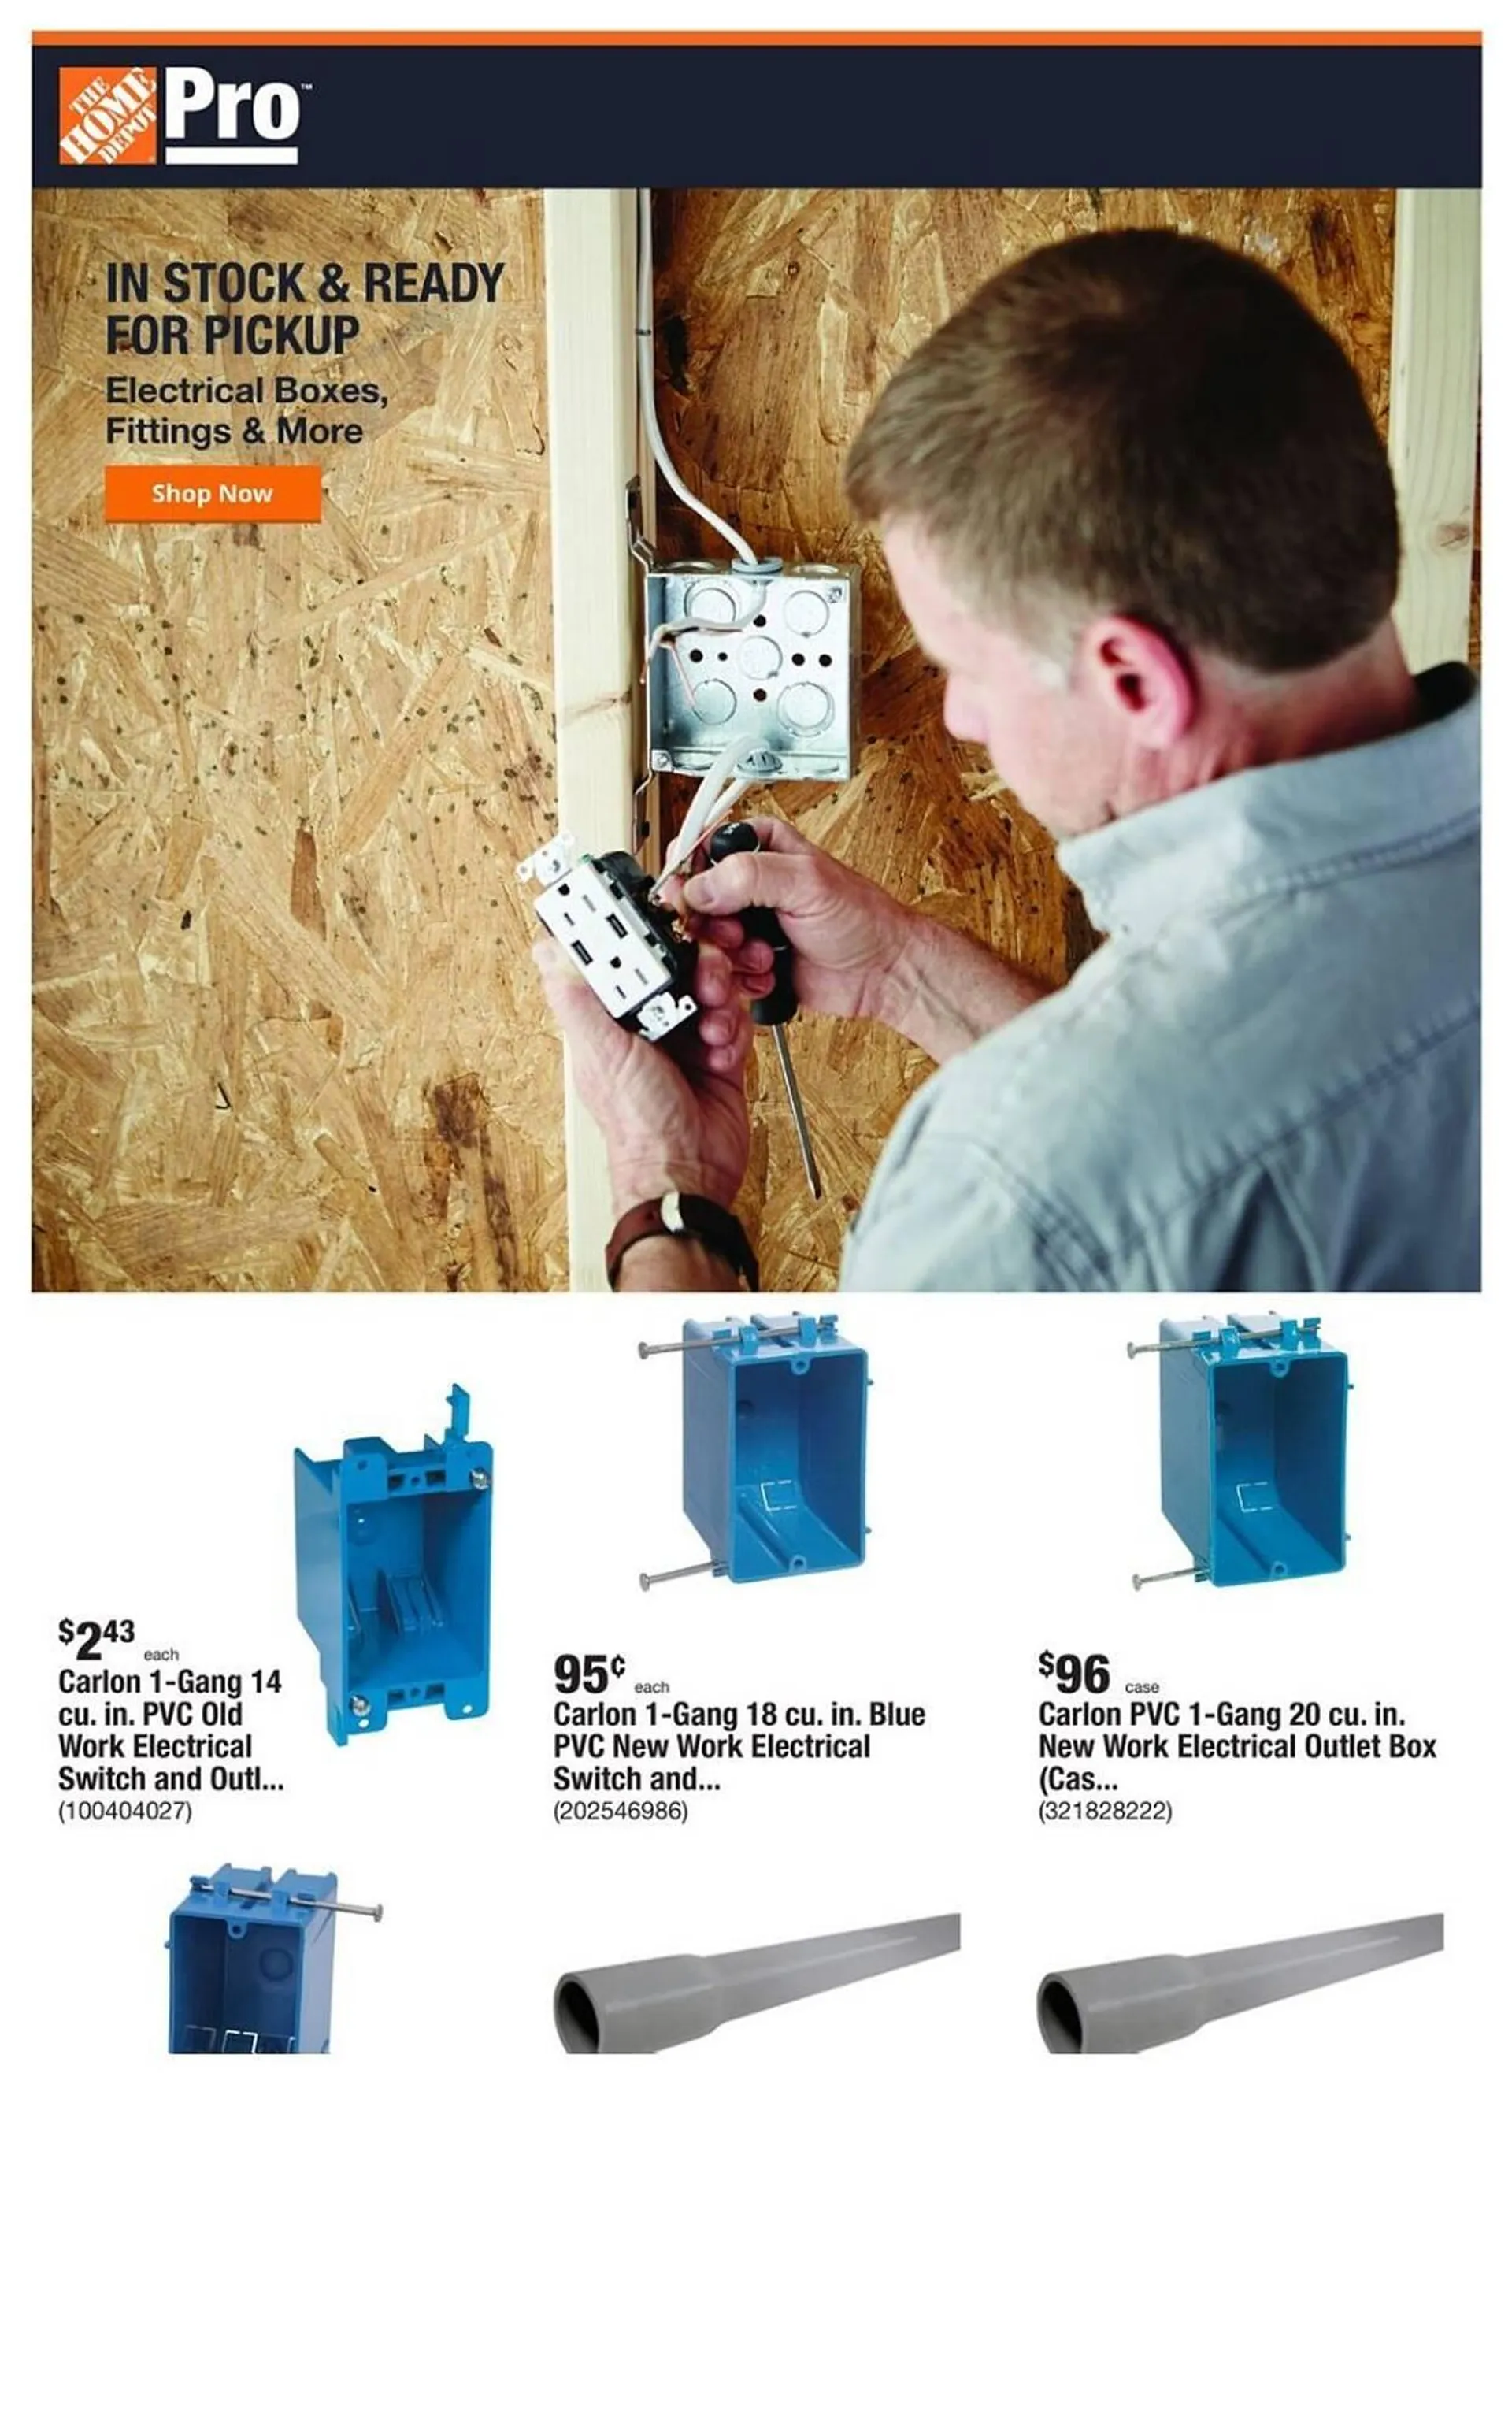 The Home Depot Weekly Ad - 1